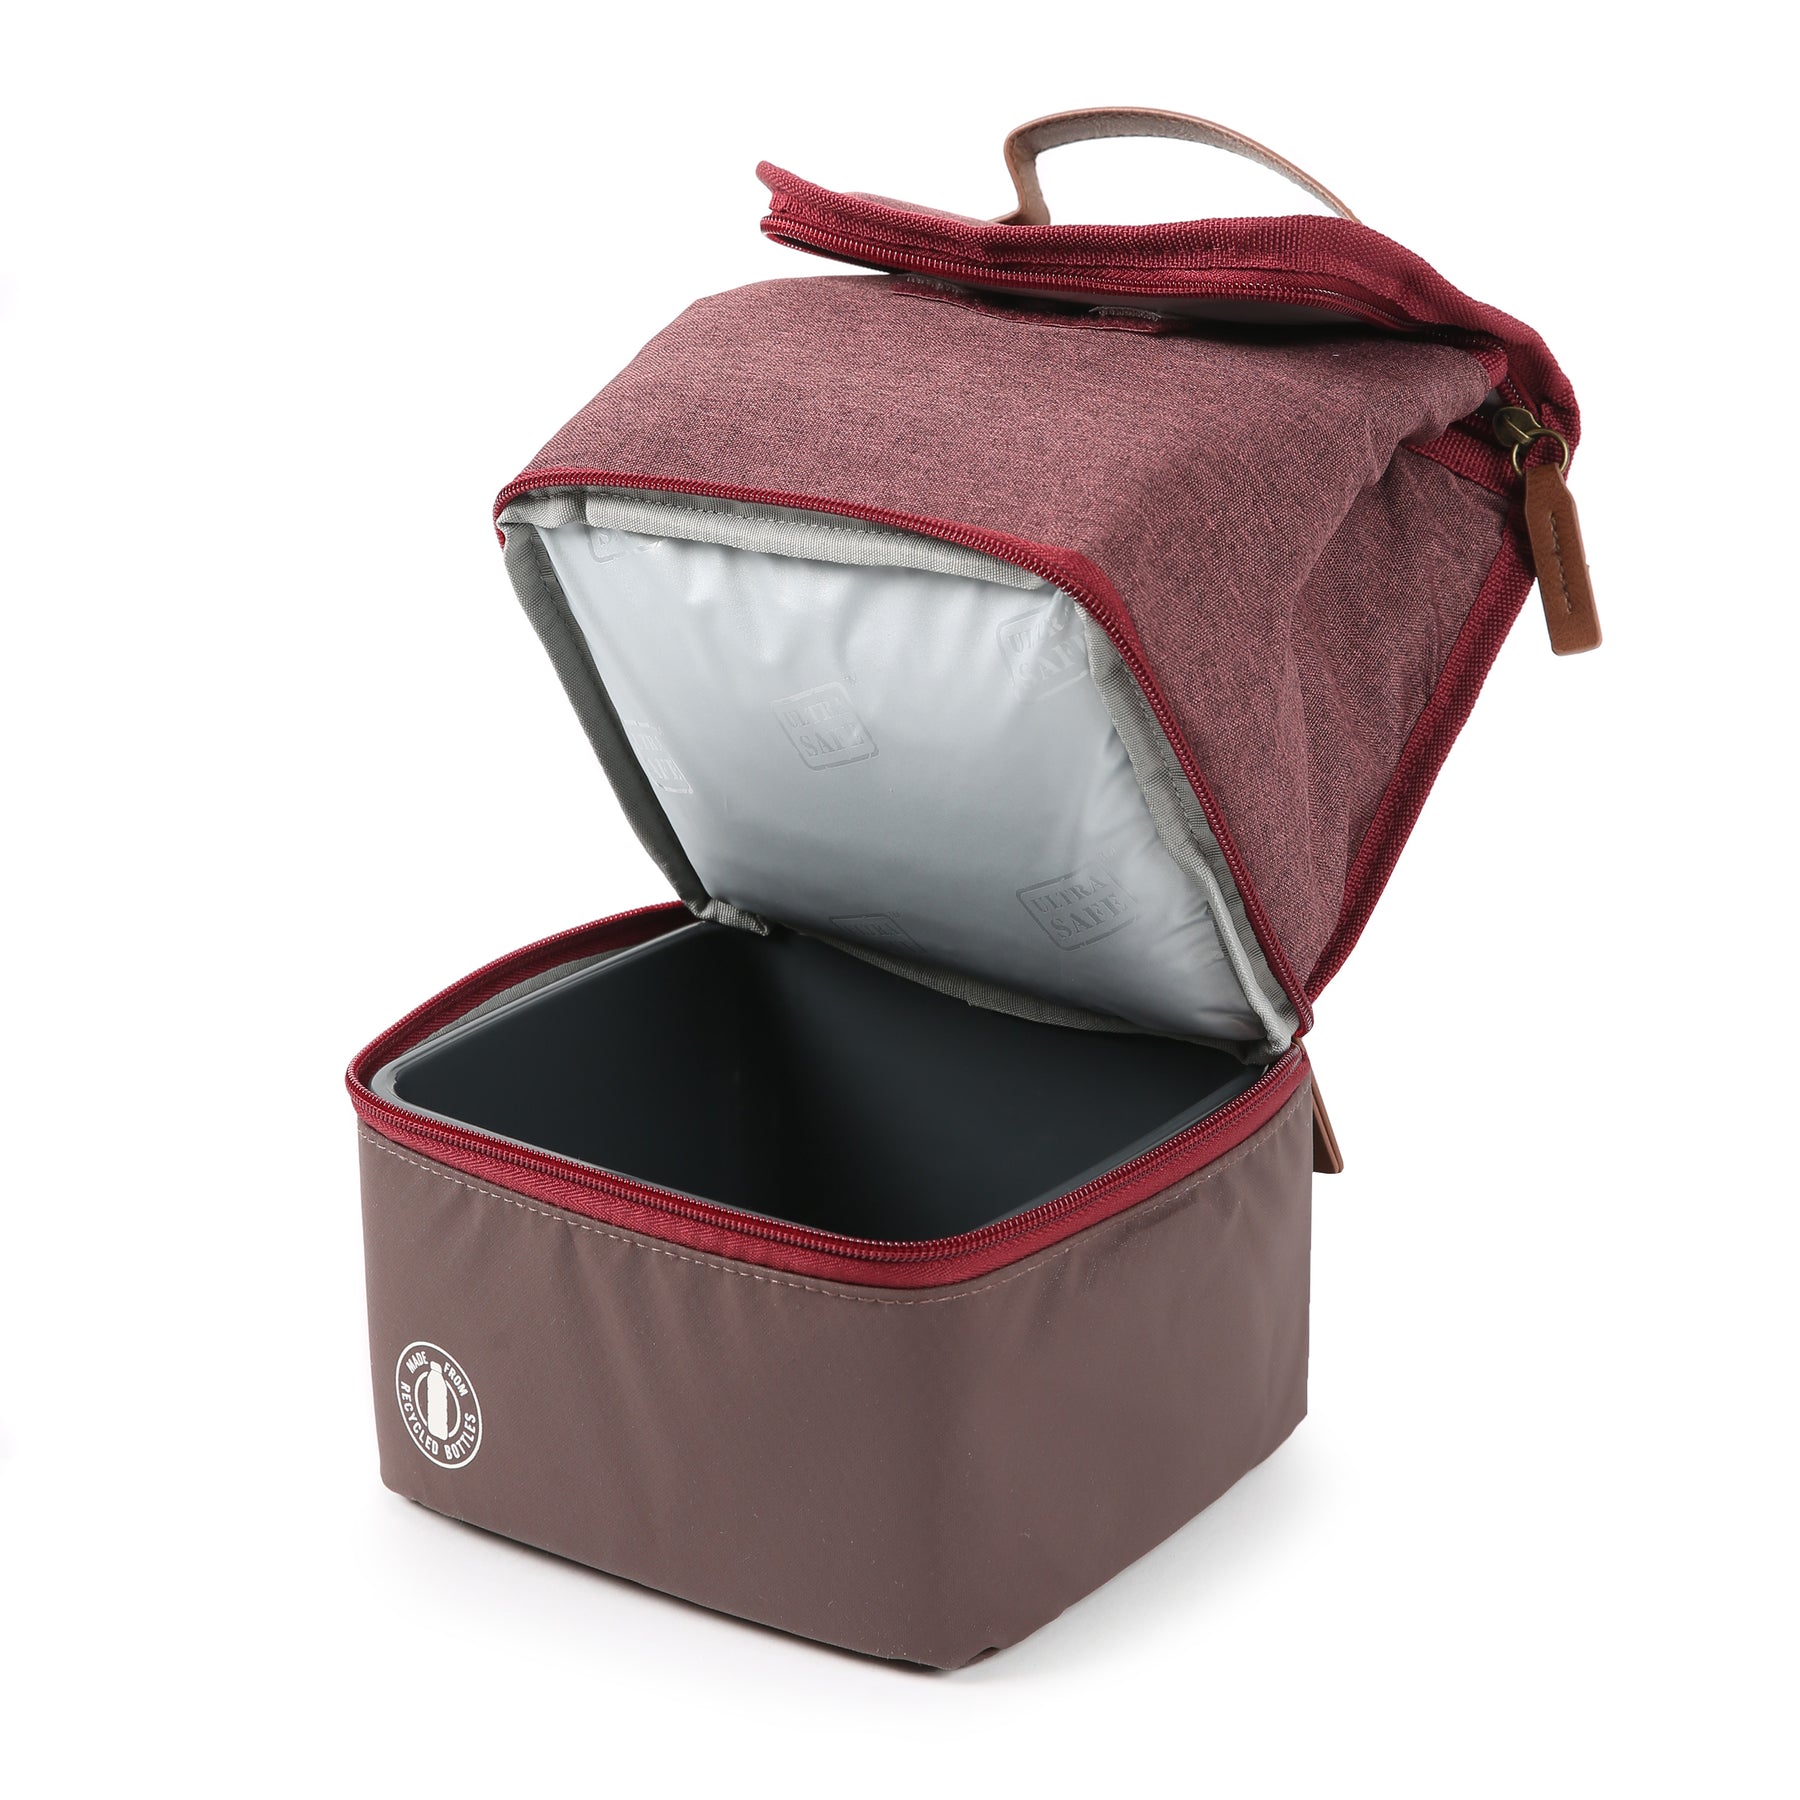 Arctic Zone® Heathered Eco Dual Compartment Hi-Top Lunch Pack | Arctic Zone